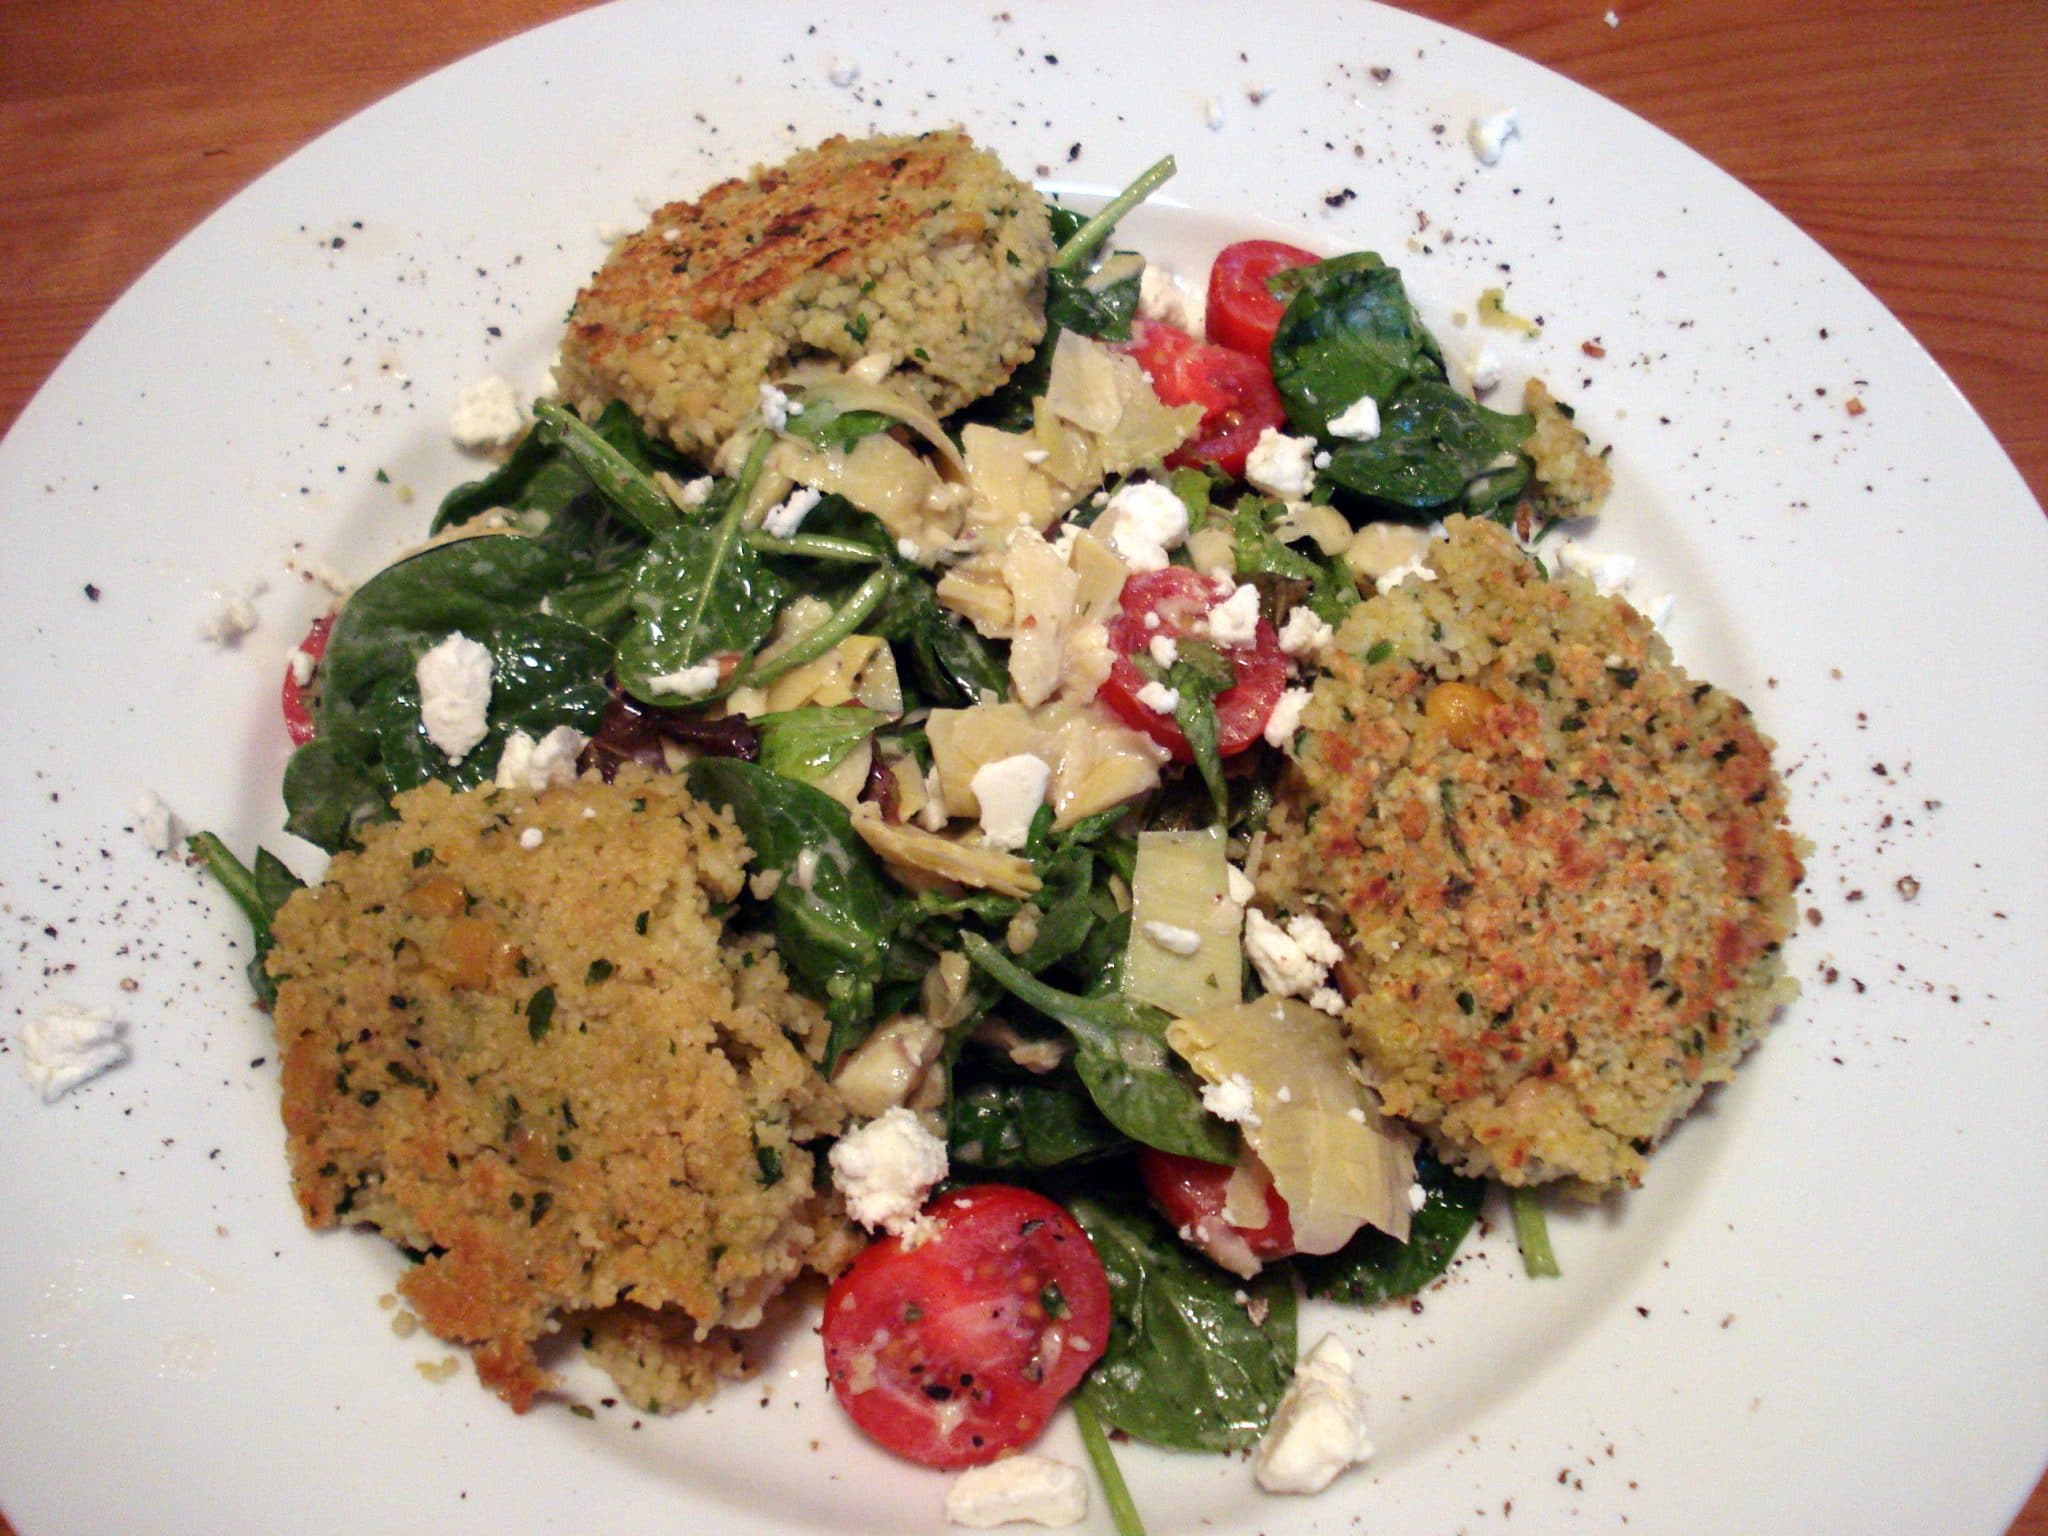 Plate of couscous cakes on top of baby spinach and tomato salad